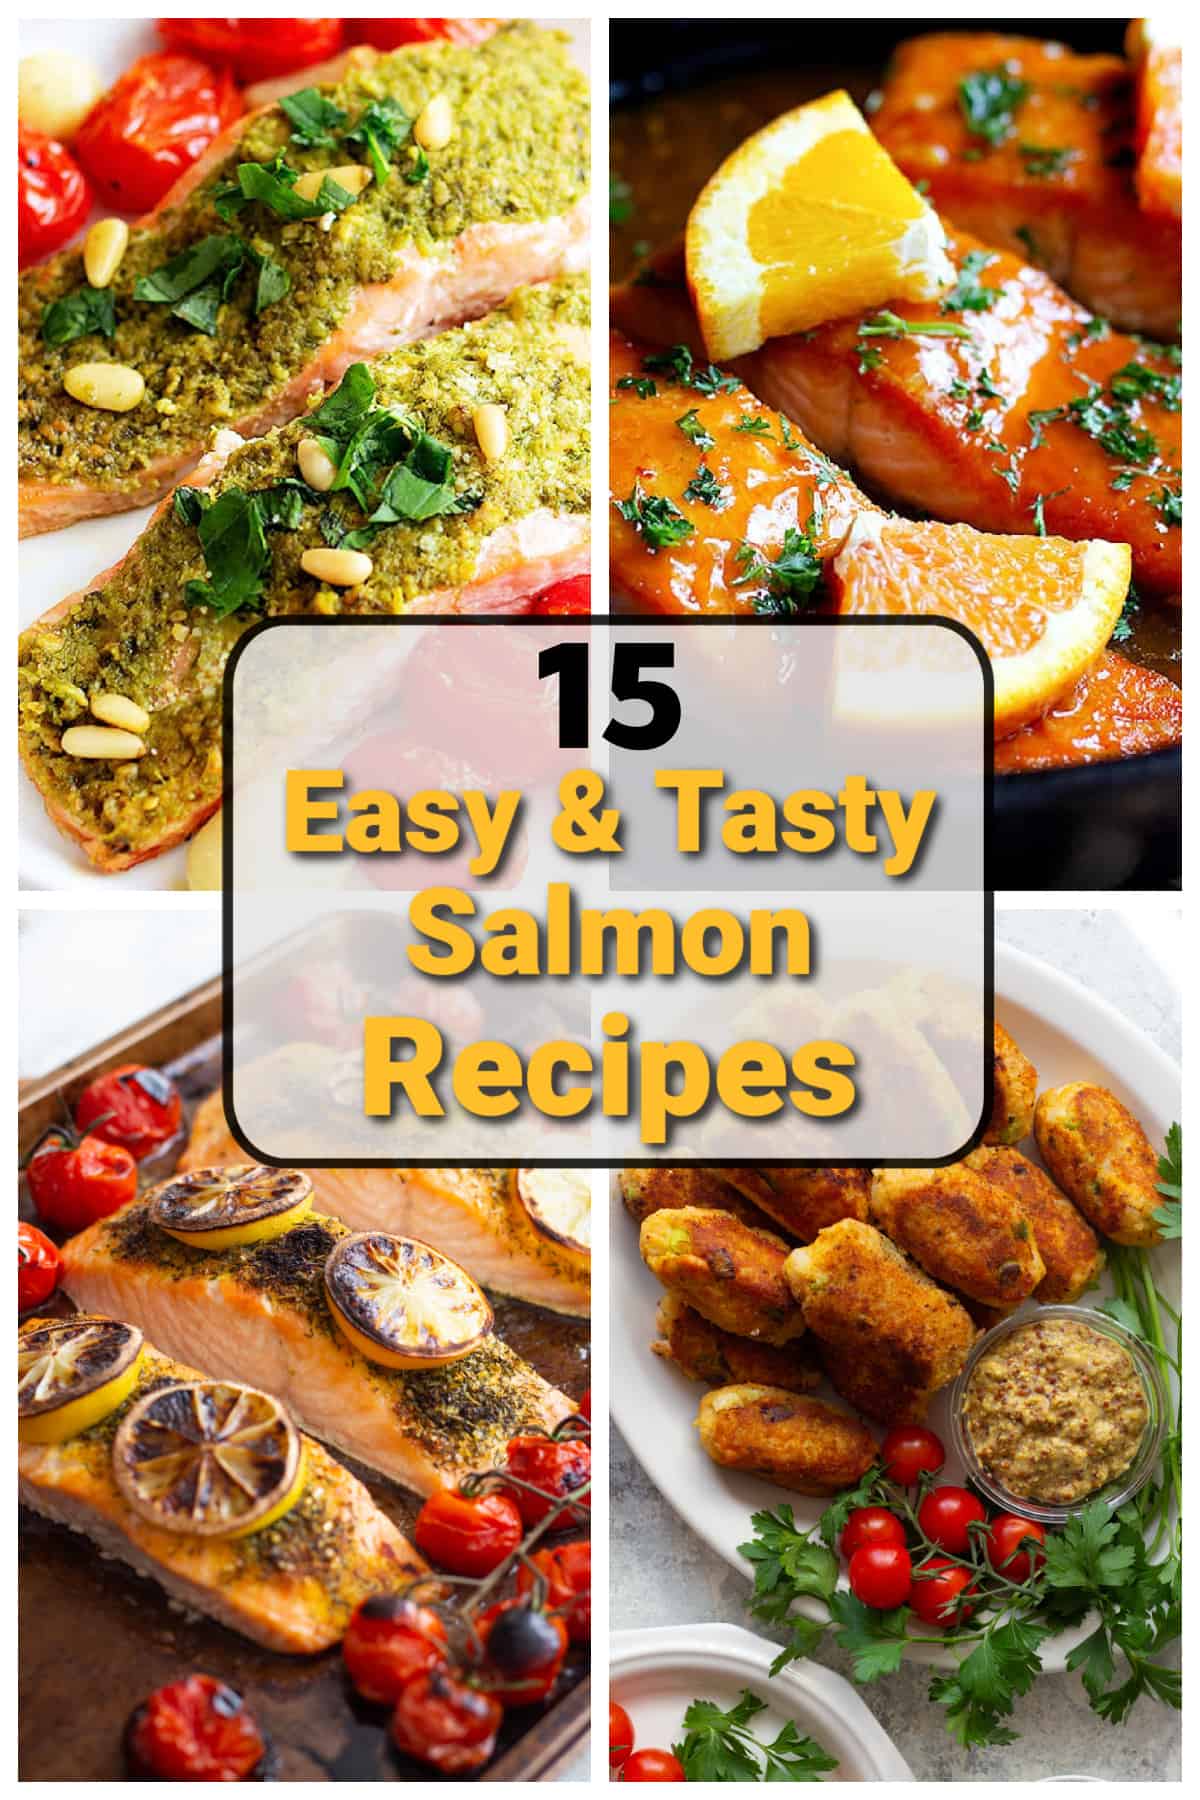 Looking for a new way to cook salmon? Check out our best salmon recipes. From baked salmon in foil to grilled grilled and everything in between, you can find many easy salmon recipes.